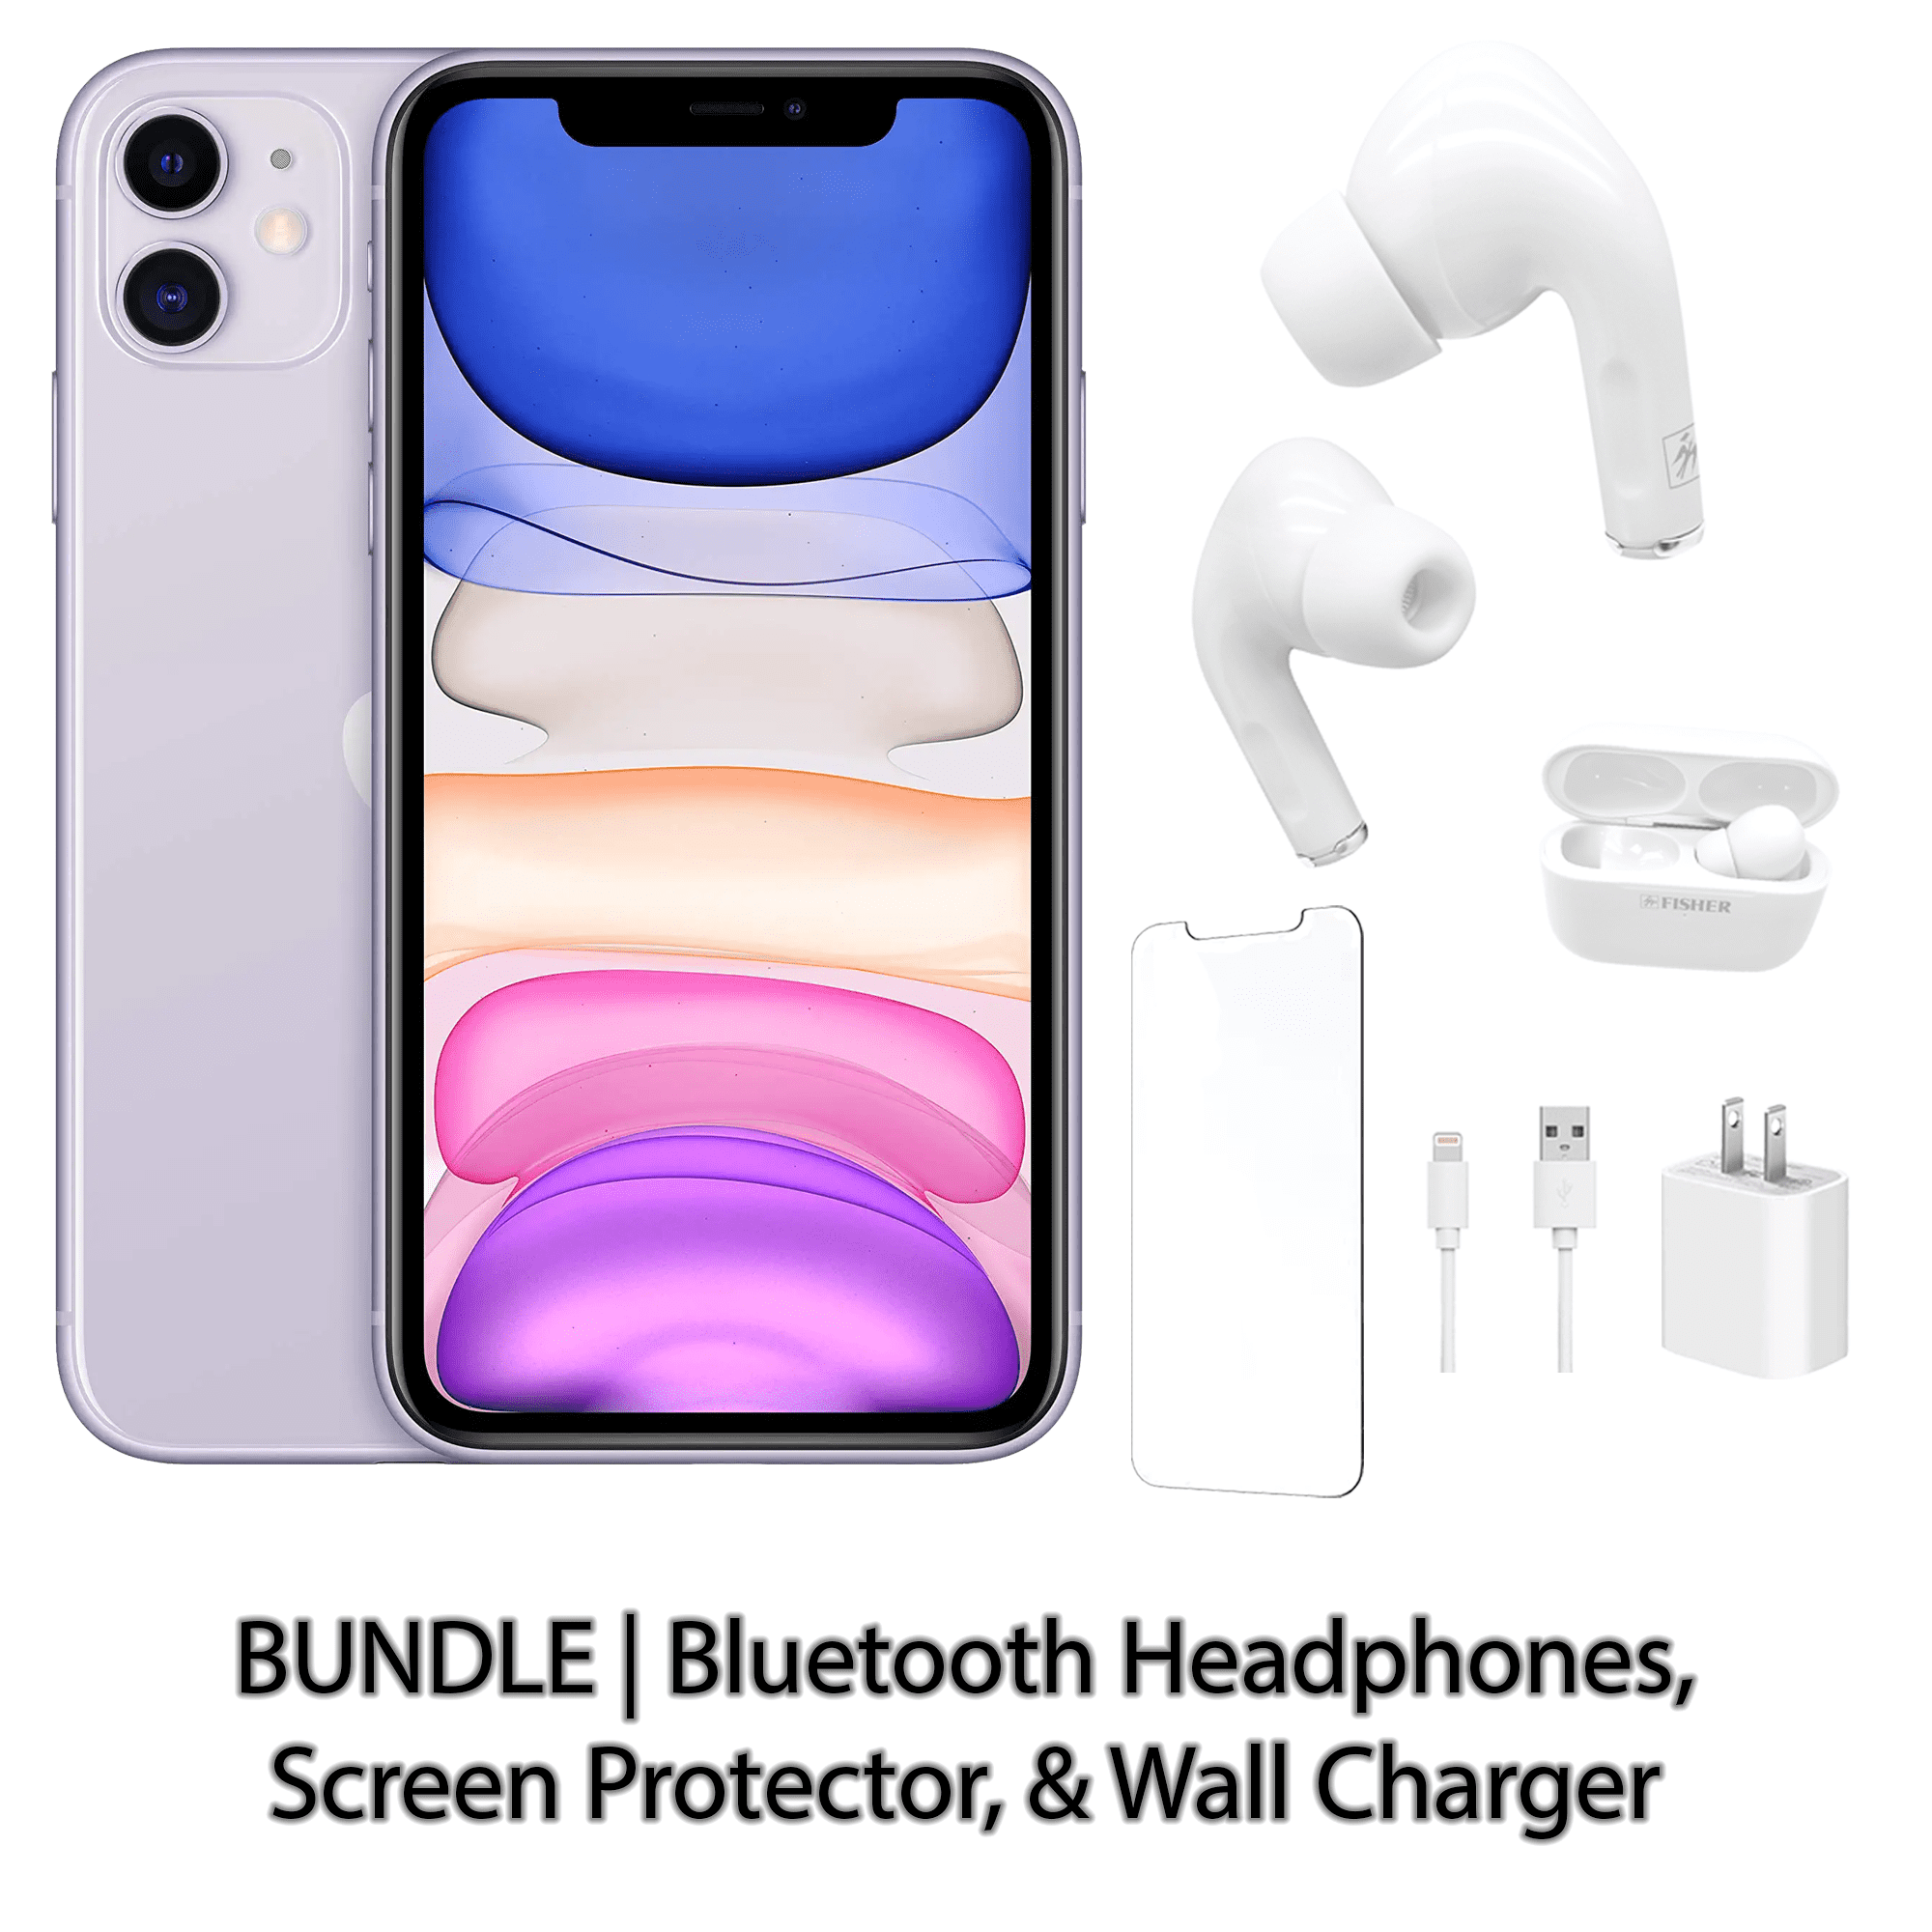 Headphones, Fully (Refurbished) 64GB Black Bluetooth & Apple 11 iPhone with Restored Screen Charger Unlocked Wall Protector,